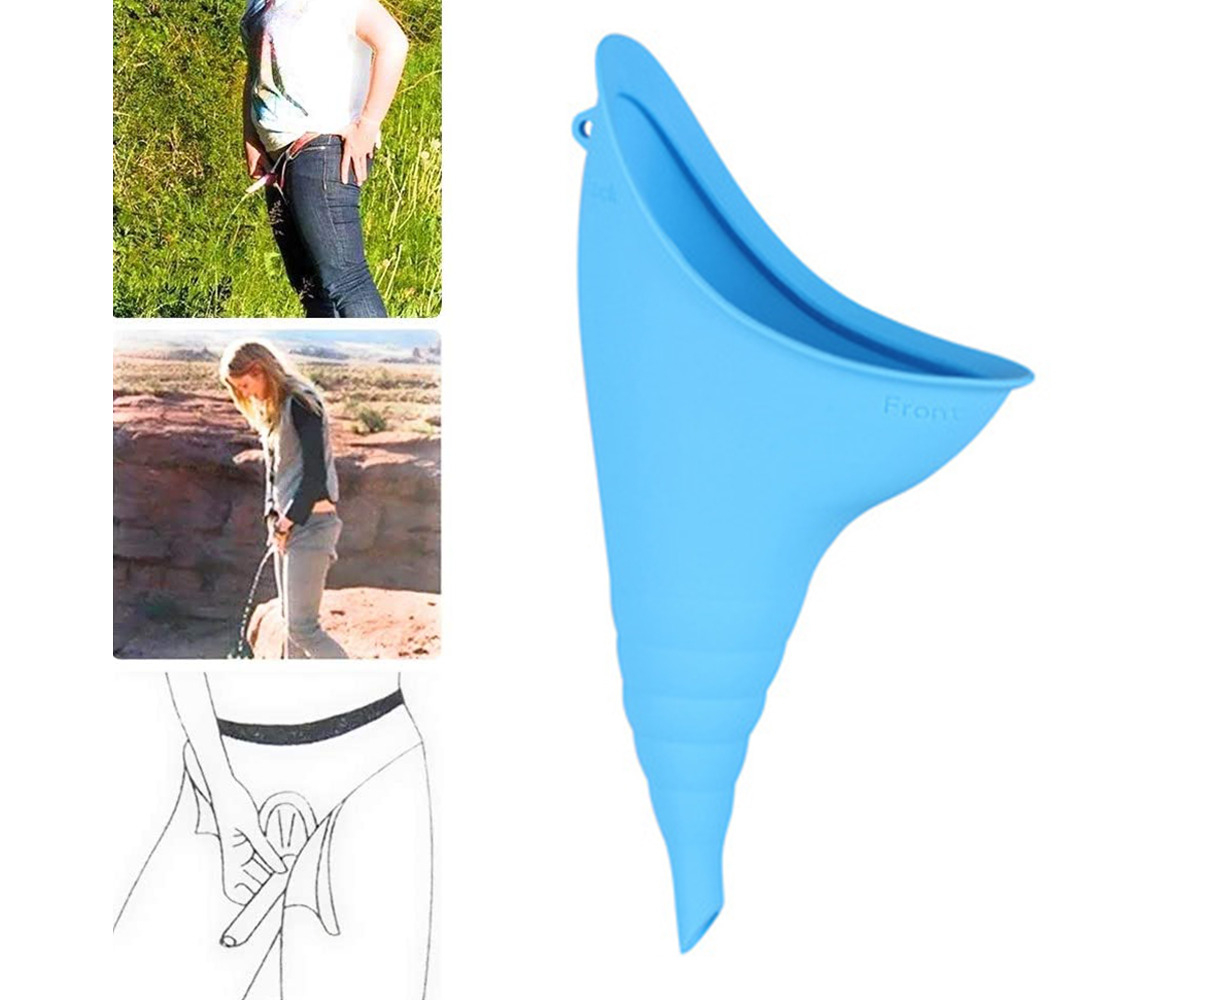  Standing Urinals for Women Female Urination Device, Women  Standing Pee Portable Urinal Funnel Lets Pee Standing Up, Reusable Urinal  Funnel For Ladies Pee Funnel for Camping, Outdoor, Pregnancy, 2 Pack 